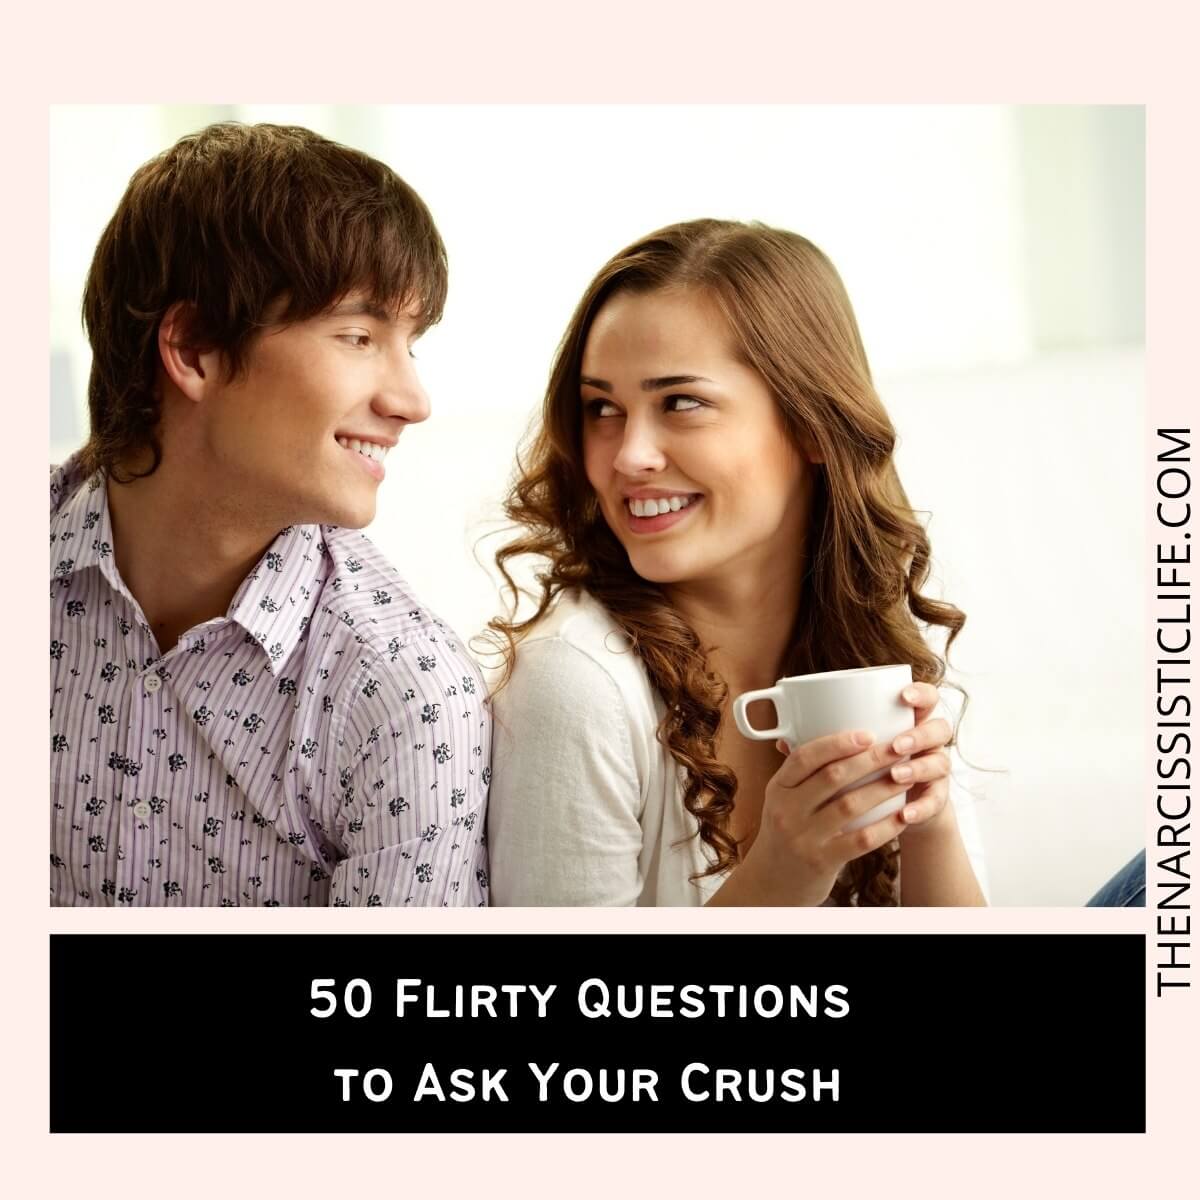 Now that you know why flirting is important, what are some flirty questions ...